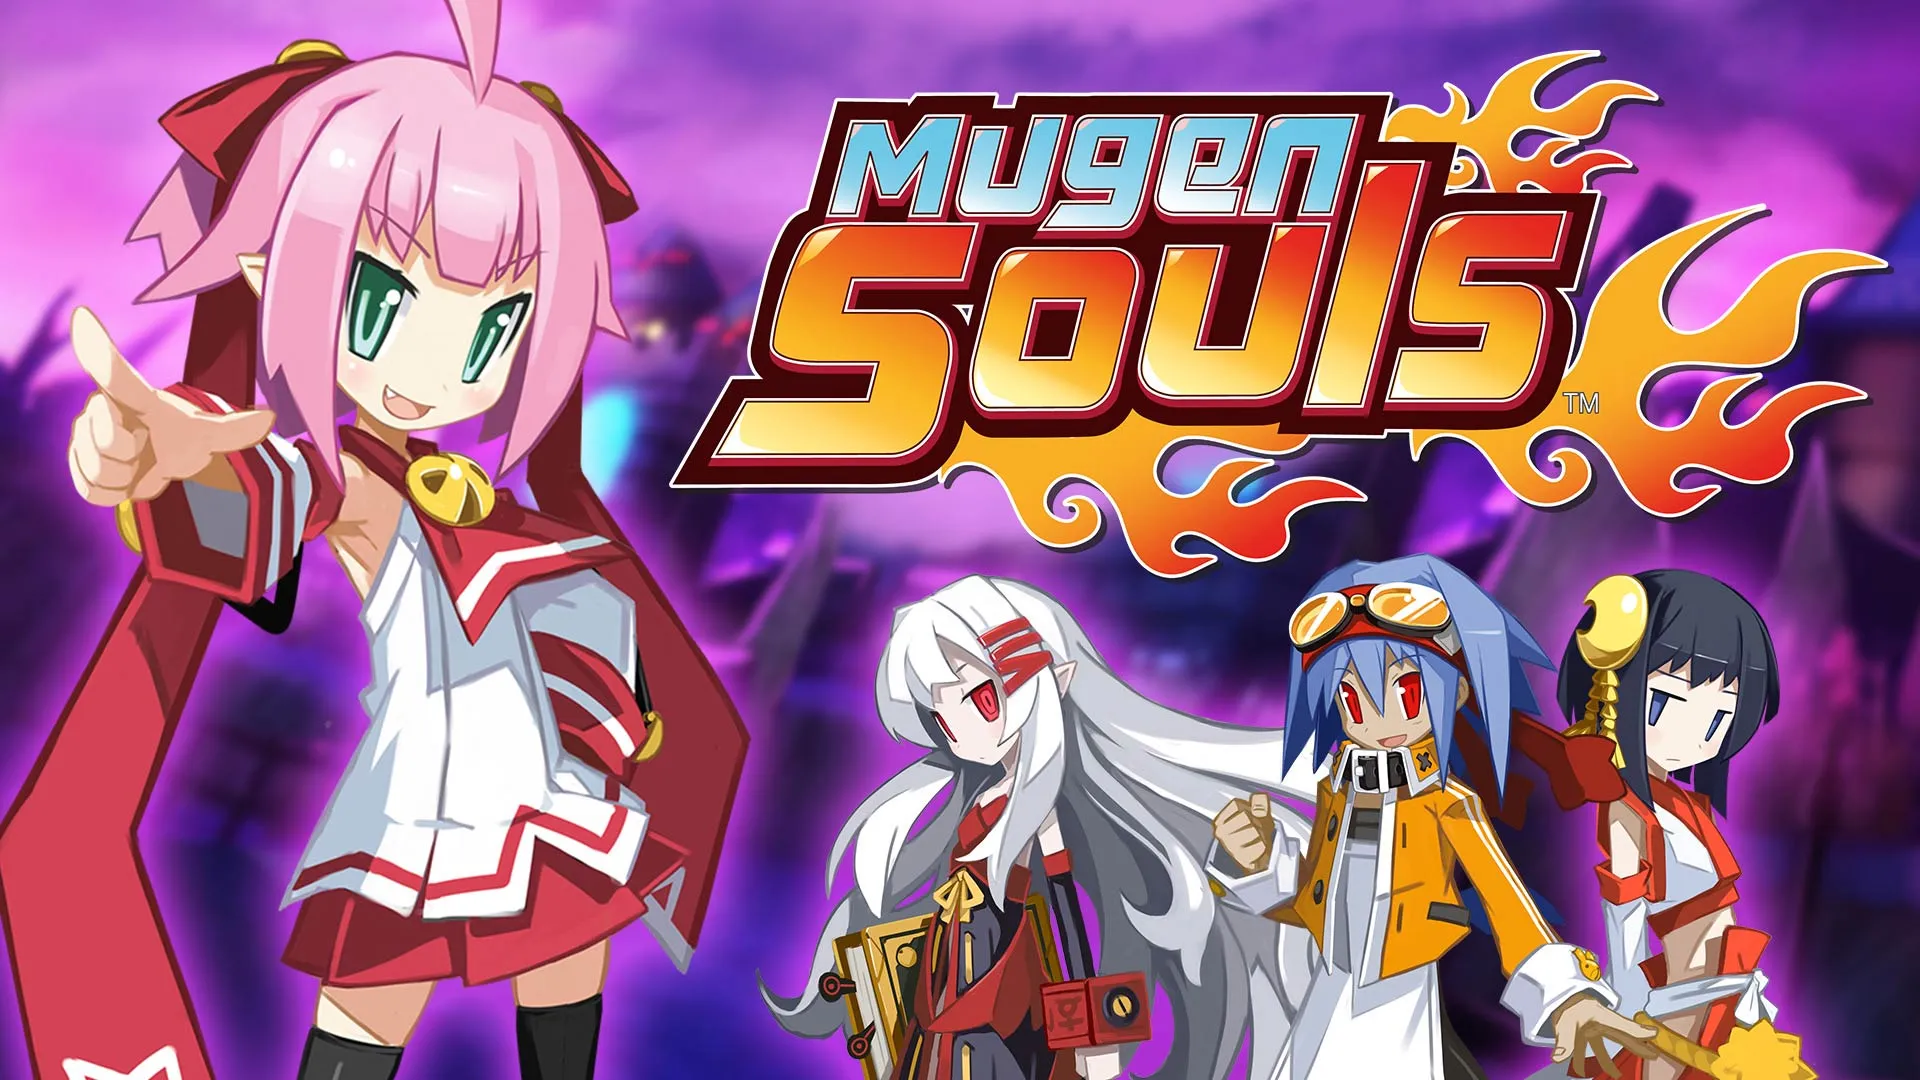 Mugen Souls Nintendo Switch digital and physical editions announced